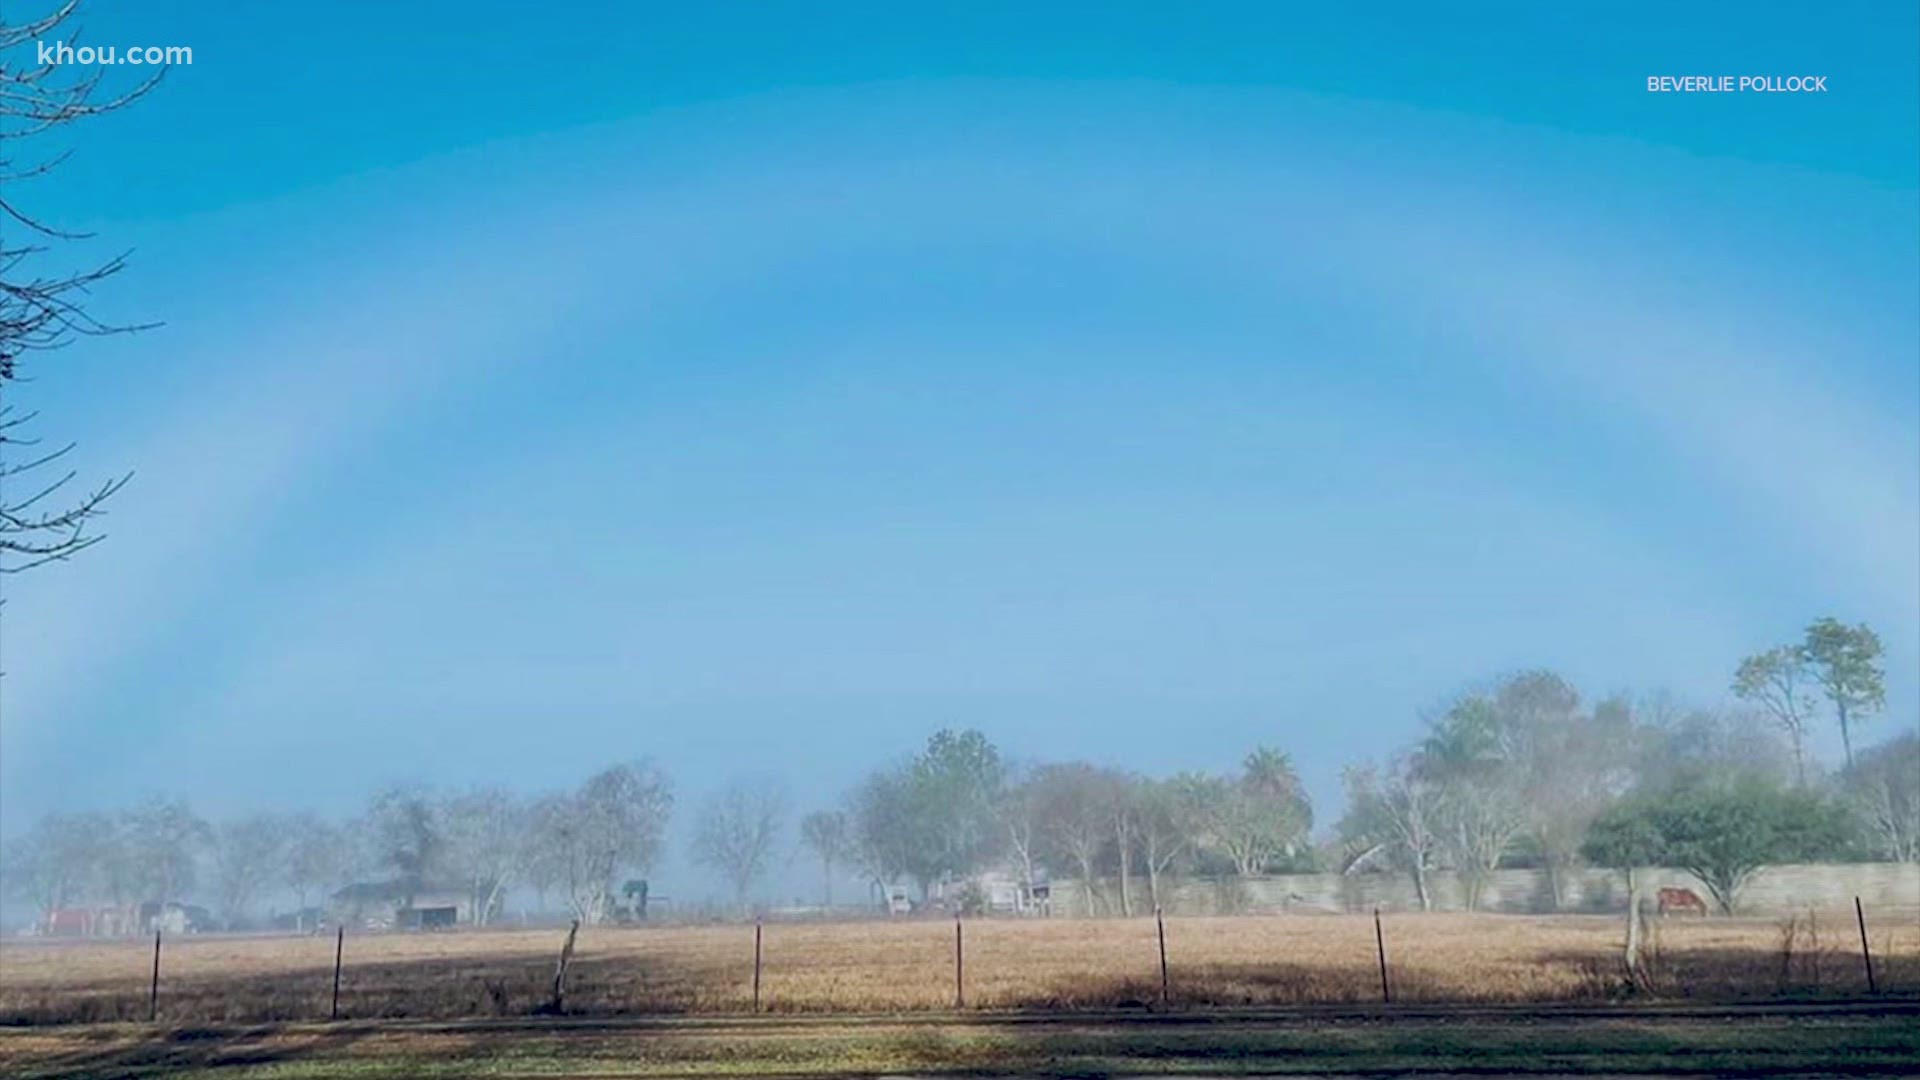 Beverlie Pollock captured an image of the ghost-like rainbow in Needville, Texas. The cousin of the colorful rainbows can appear when it's foggy and sunny.